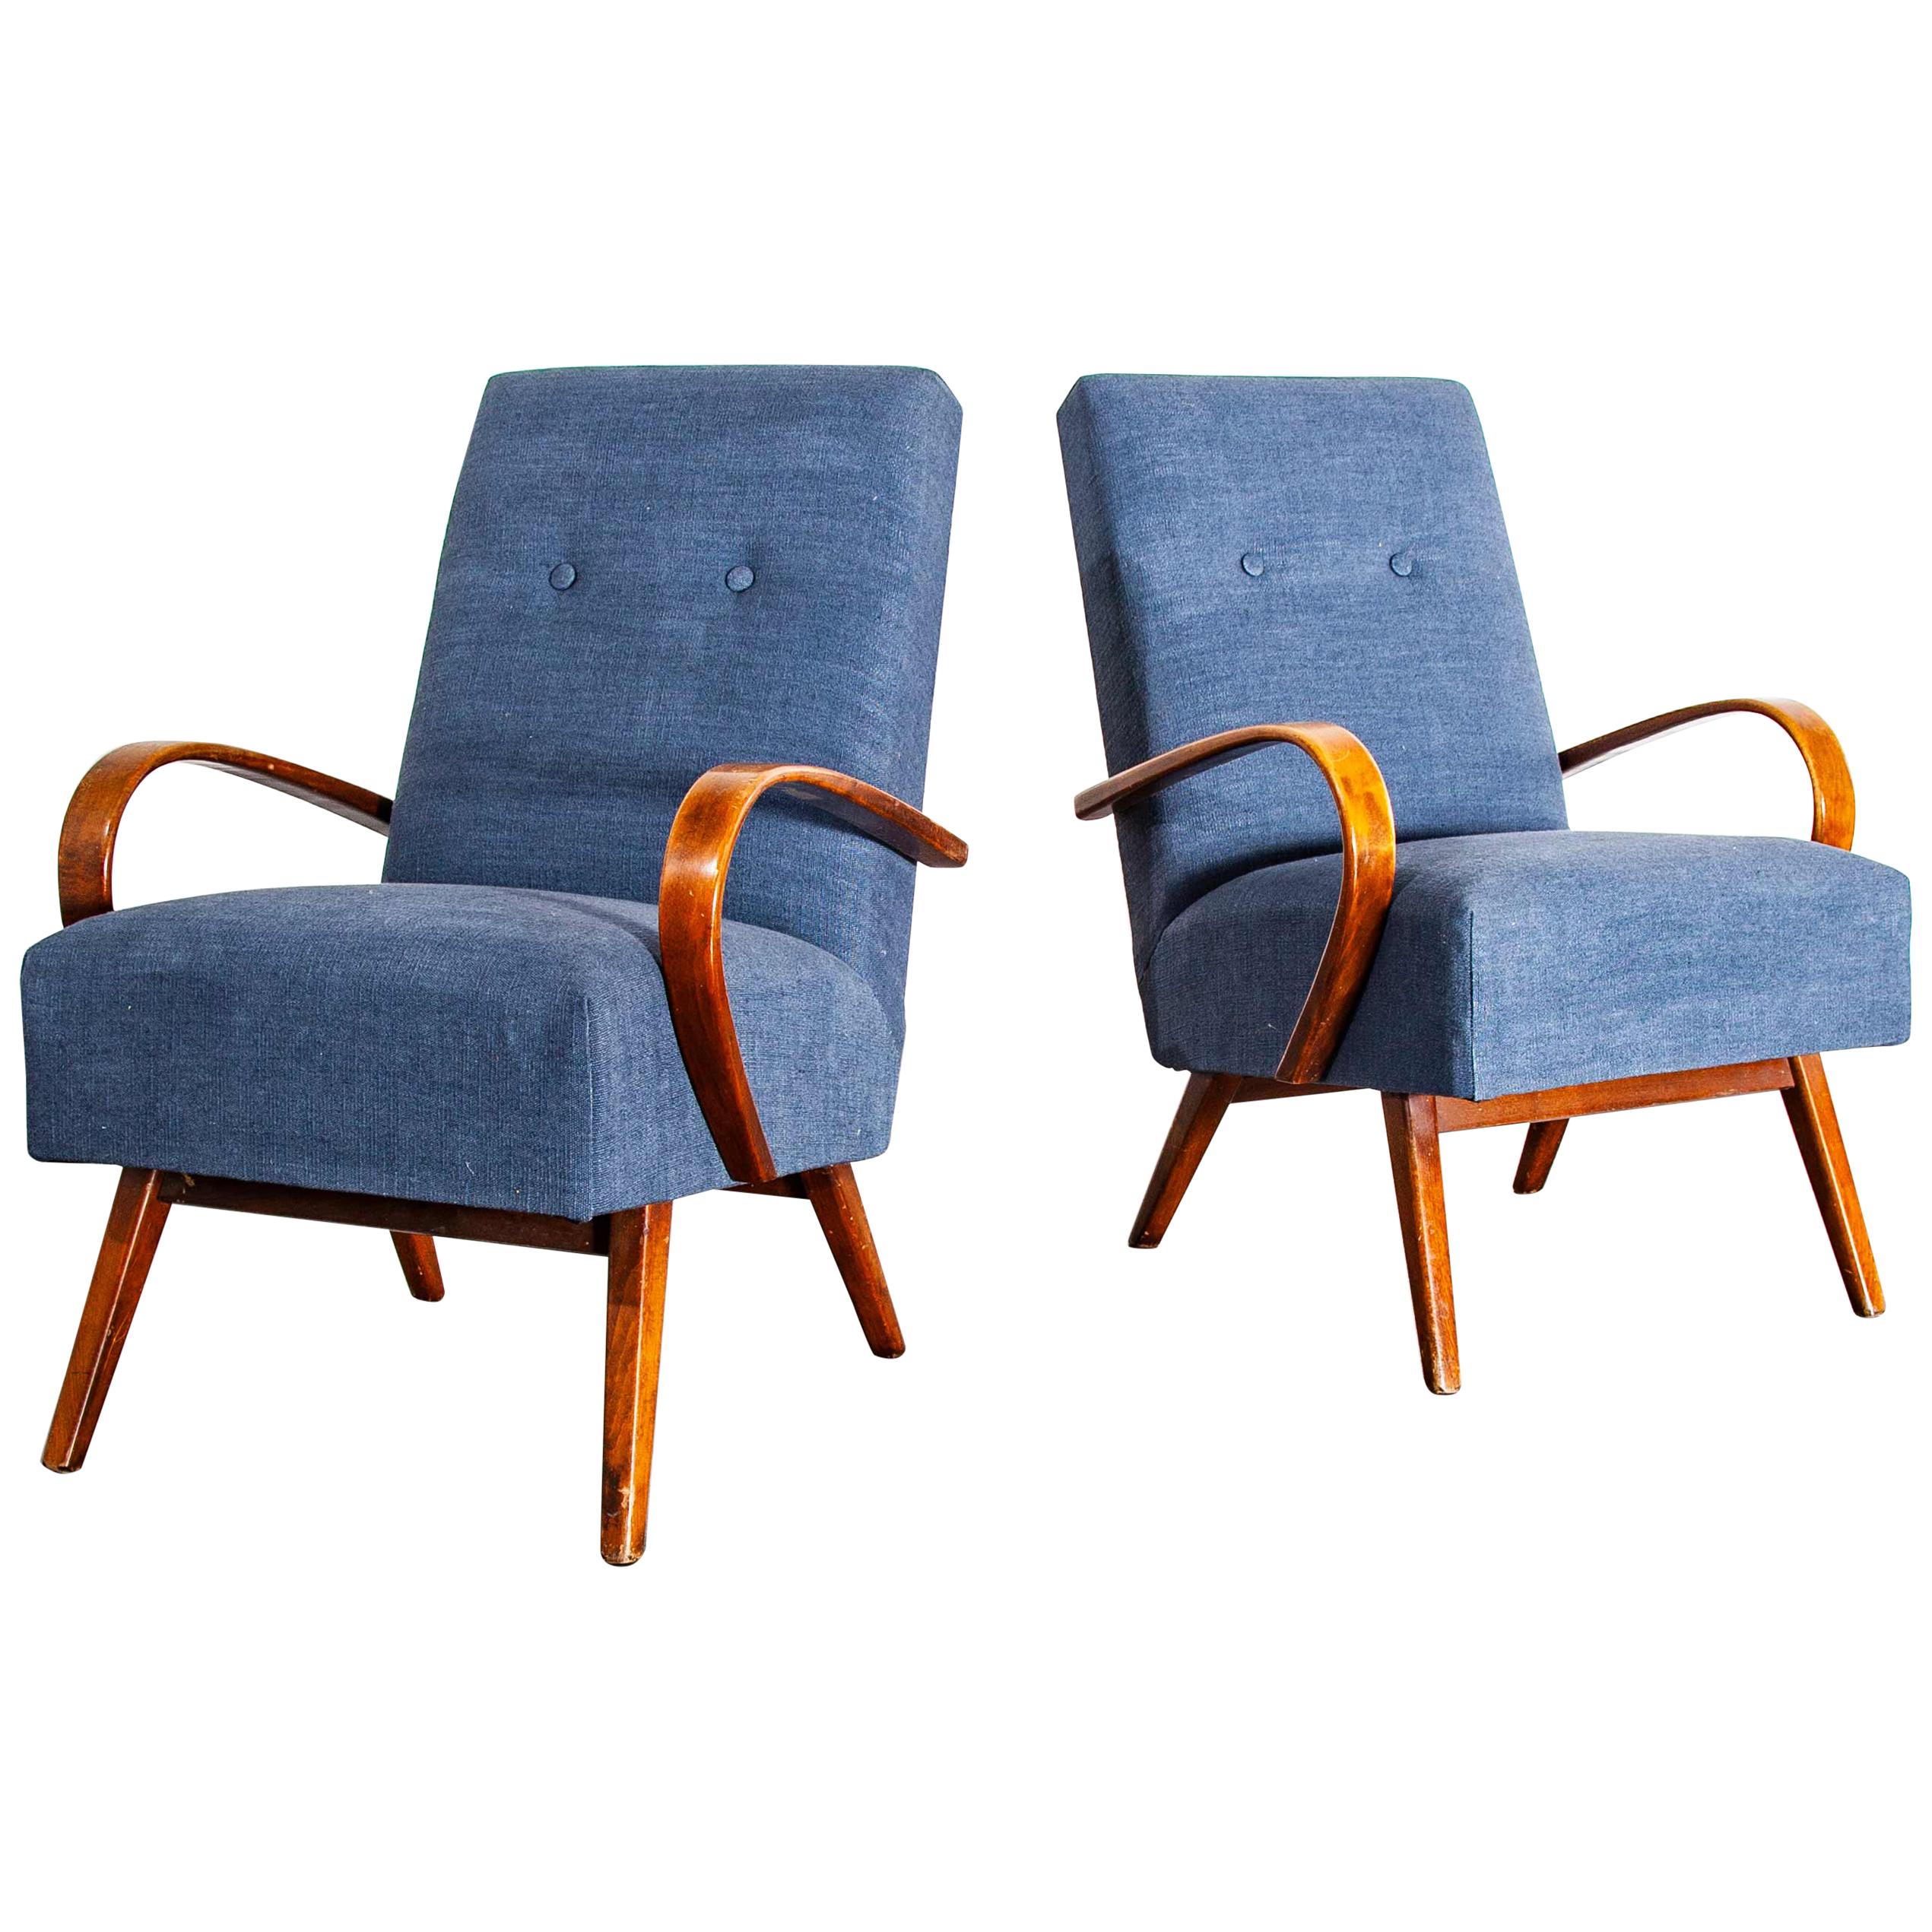 1930s Pair of Upholstered Armchairs by Jindrich Halabala